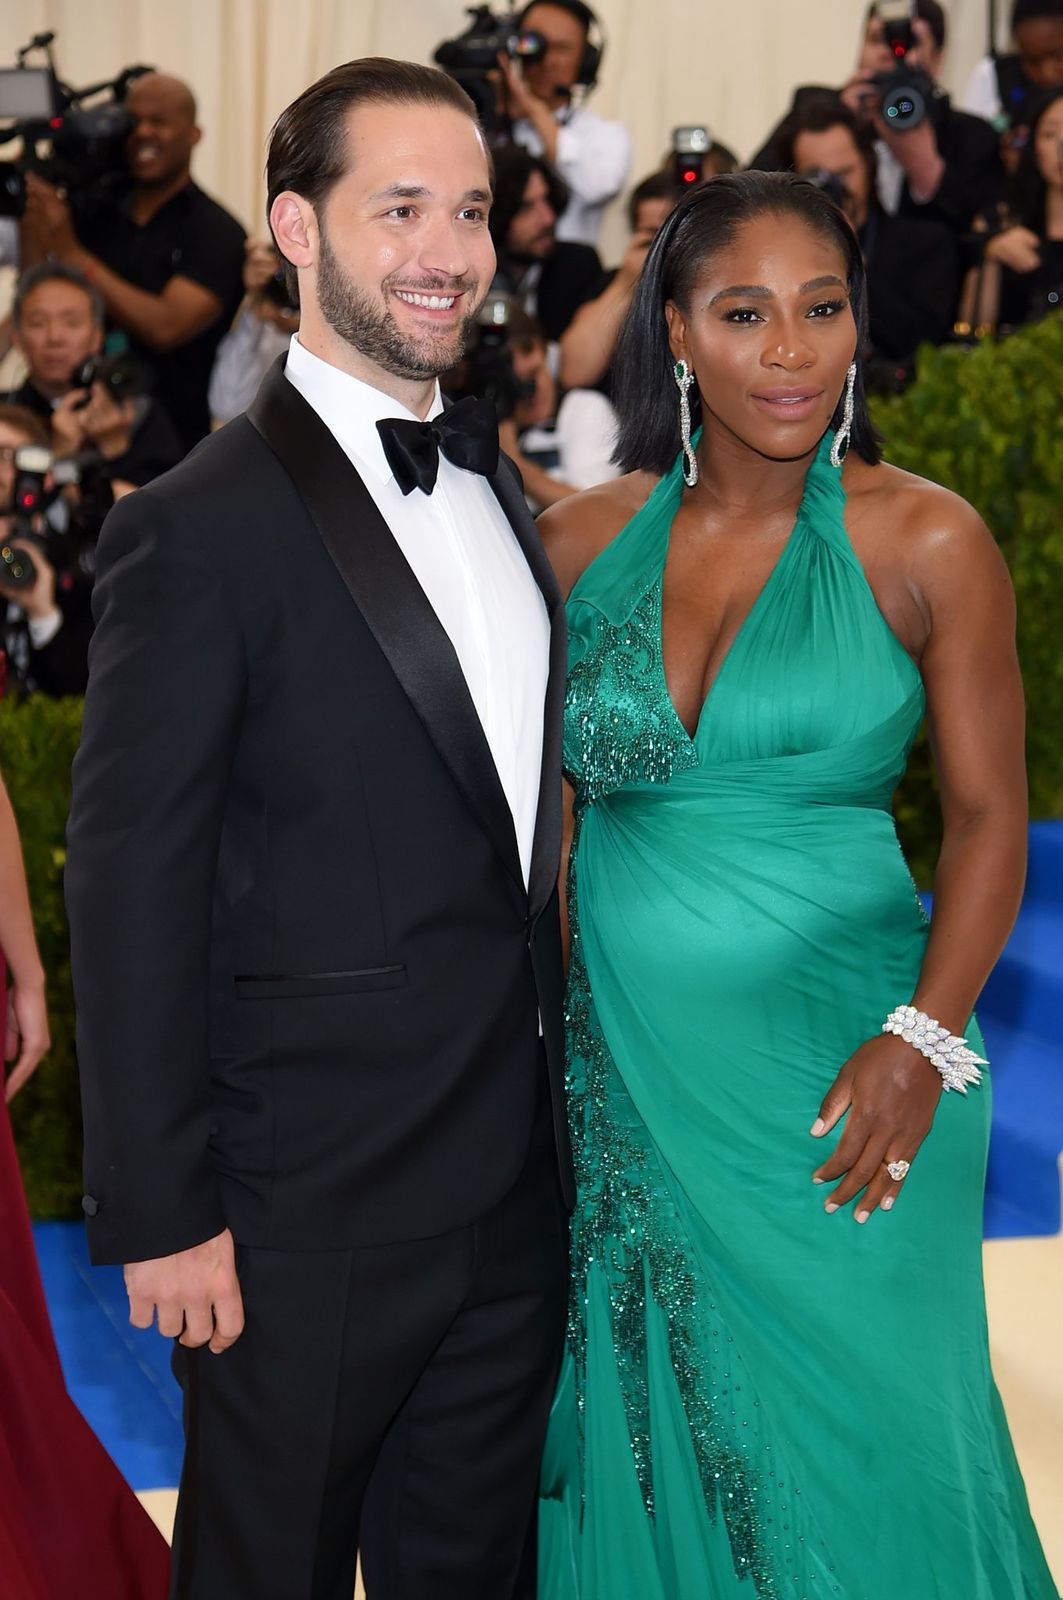 Alexis Ohanian and Serena Williams attend the "Rei Kawakubo/Comme des Garcons: Art Of The In-Between" Costume Institute Gala at Metropolitan Museum of Art on May 1, 2017 in New York City. | Photo: Getty Images.